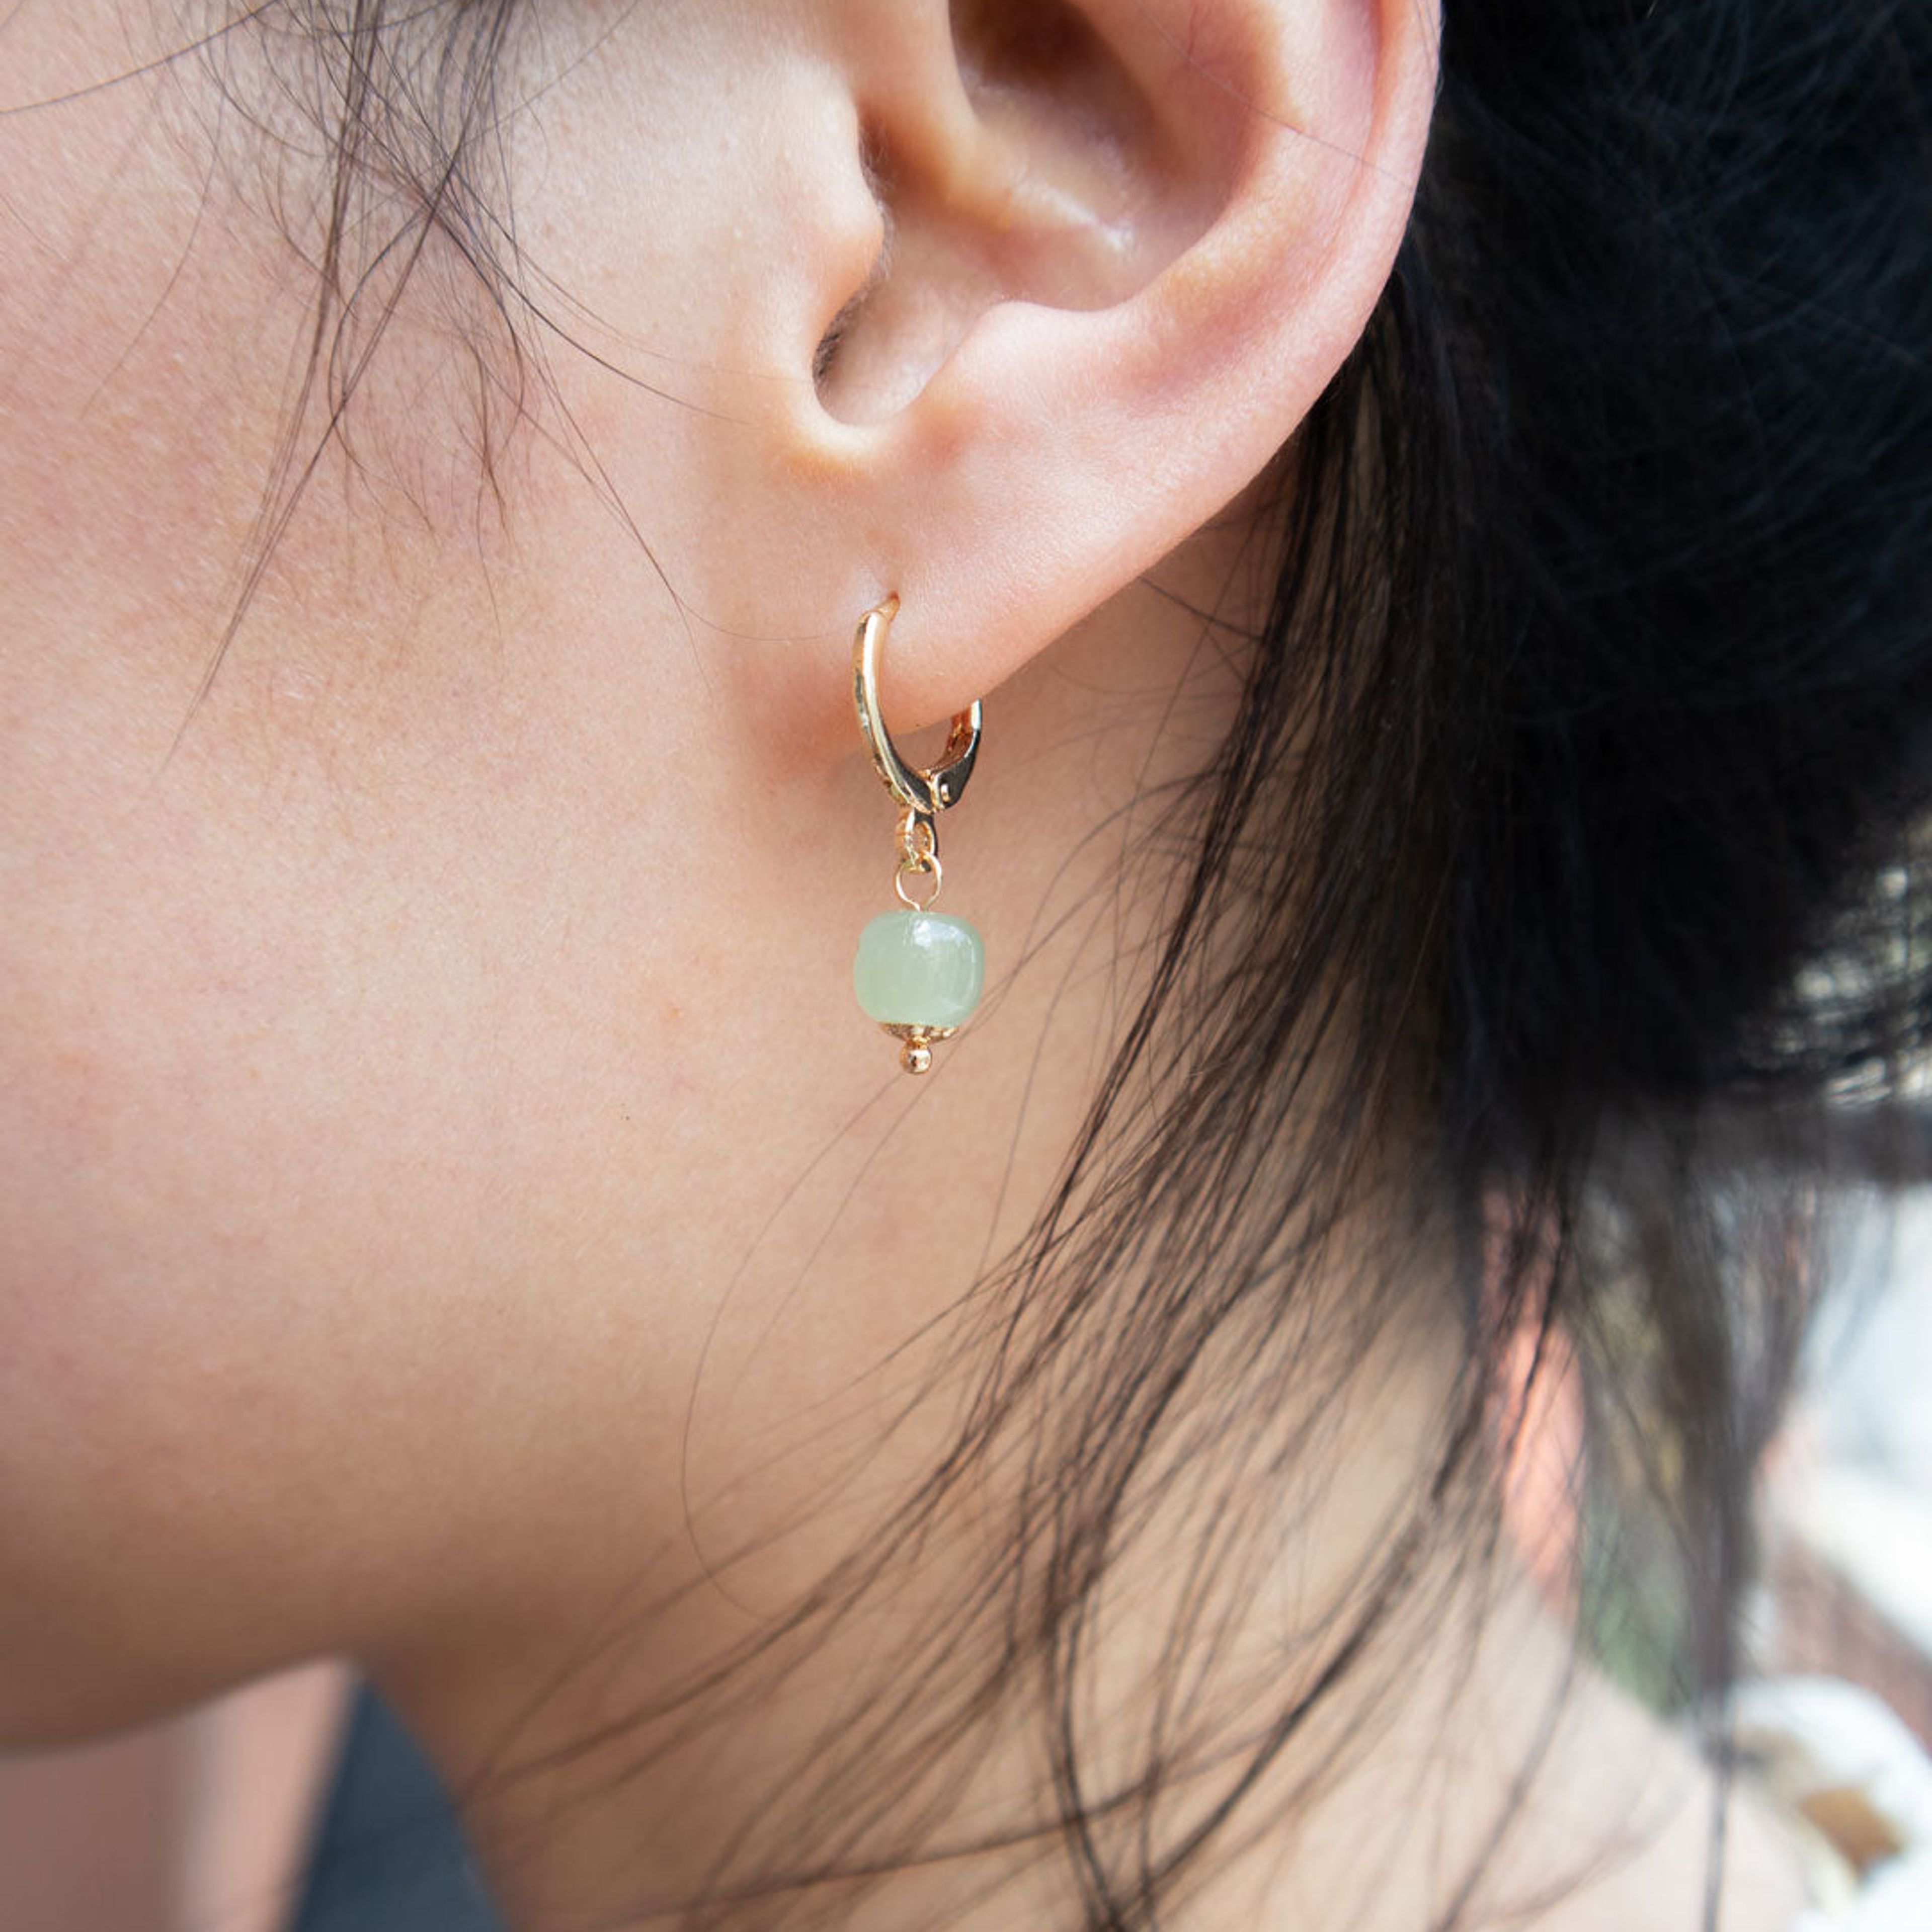 Berry — Small hoop with green bead earrings and